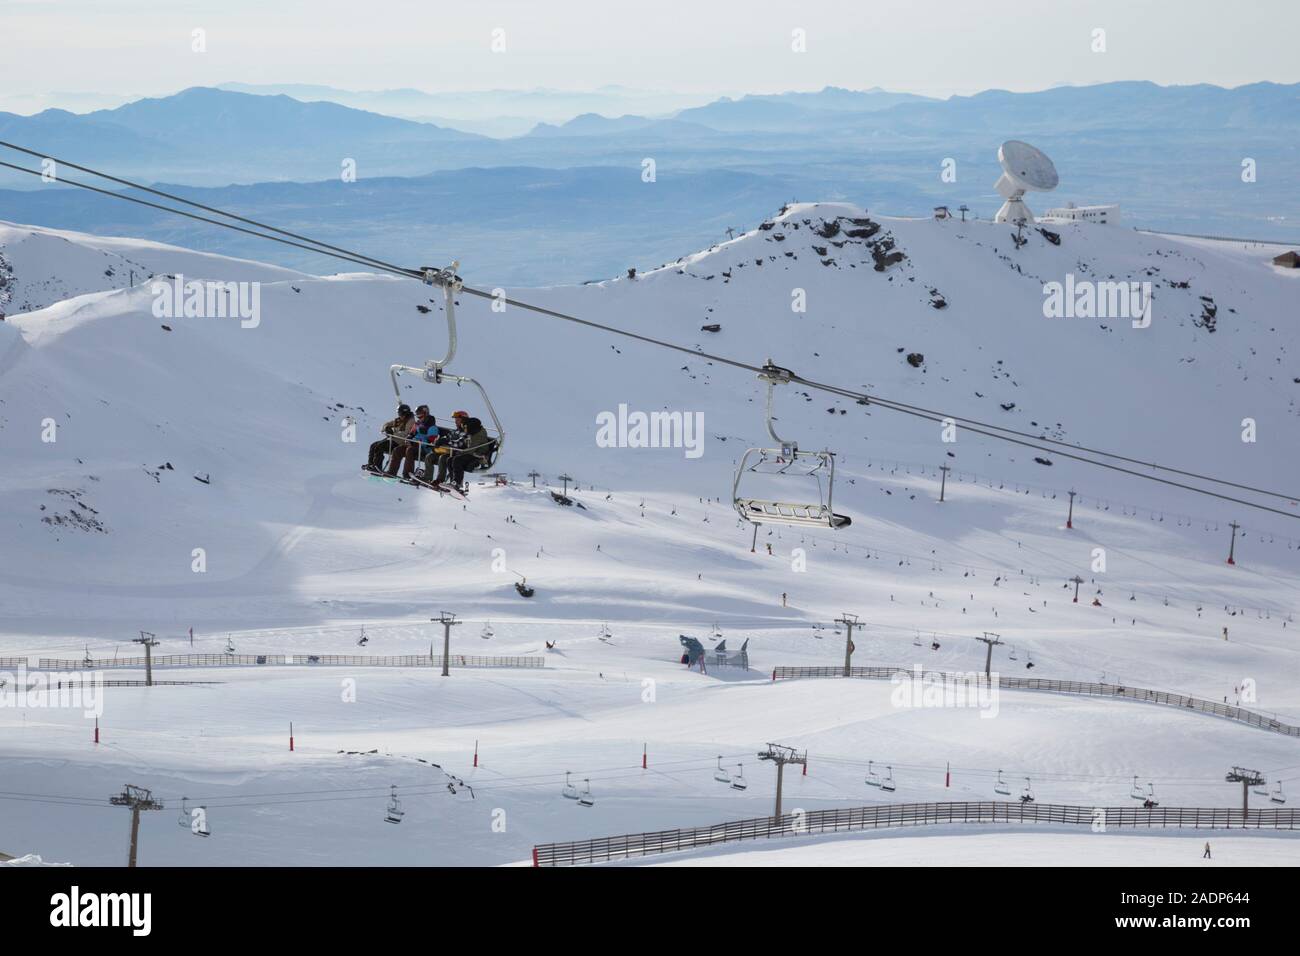 Chairlifts, pistes and the IRAM radio astronomy telescope in the Borreguiles area of the Sierra Nevada ski slopes, Granada, Andalusia, Spain Stock Photo